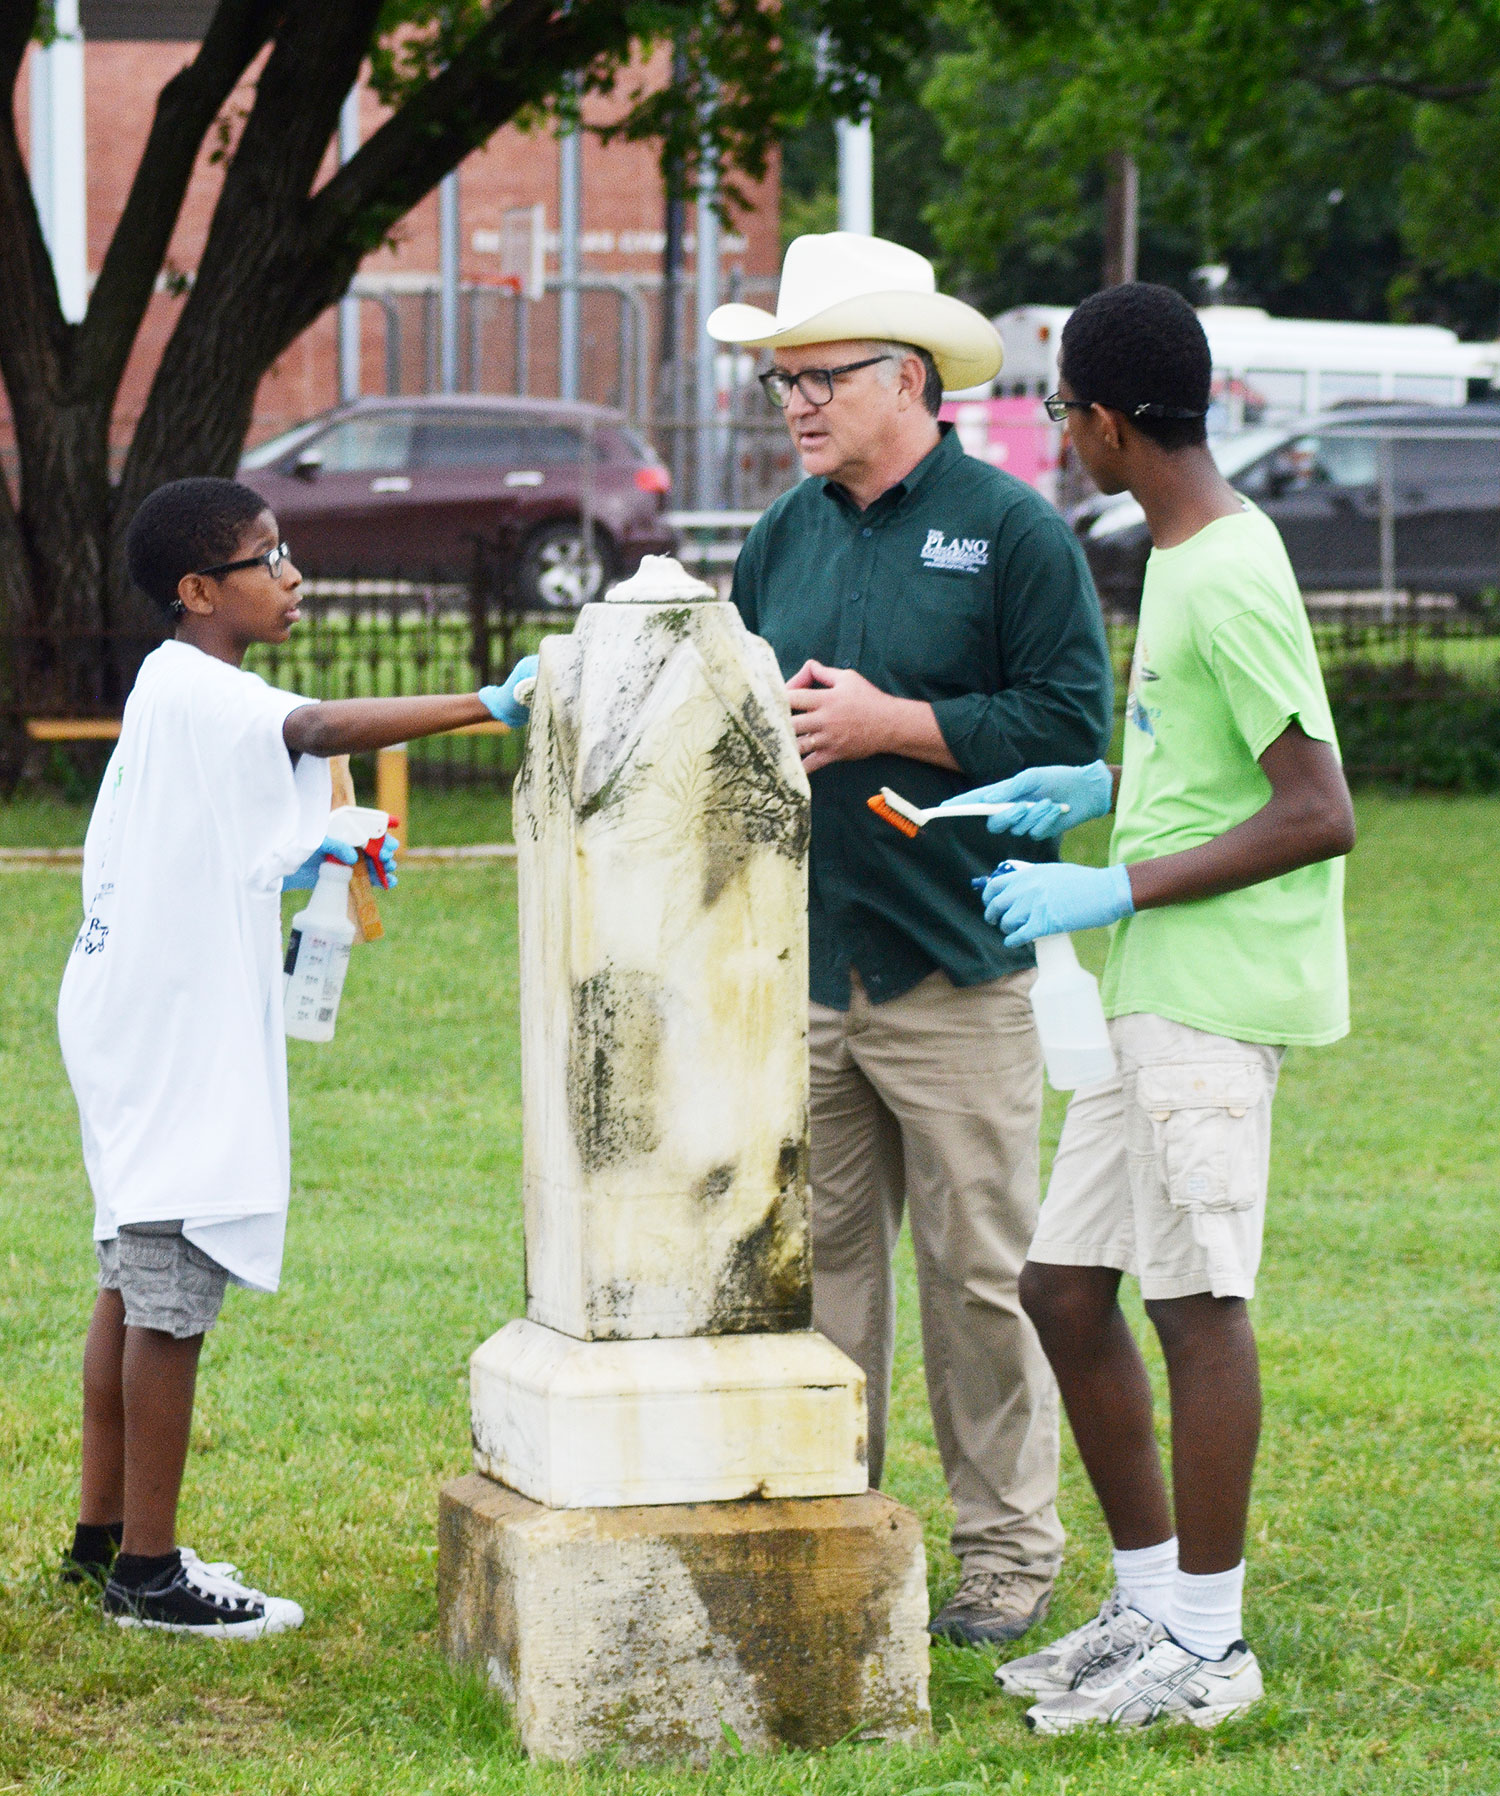 Plano Conservancy Executive Director Jeff Campbell directed local students helping clean at Tombstone Mysteries